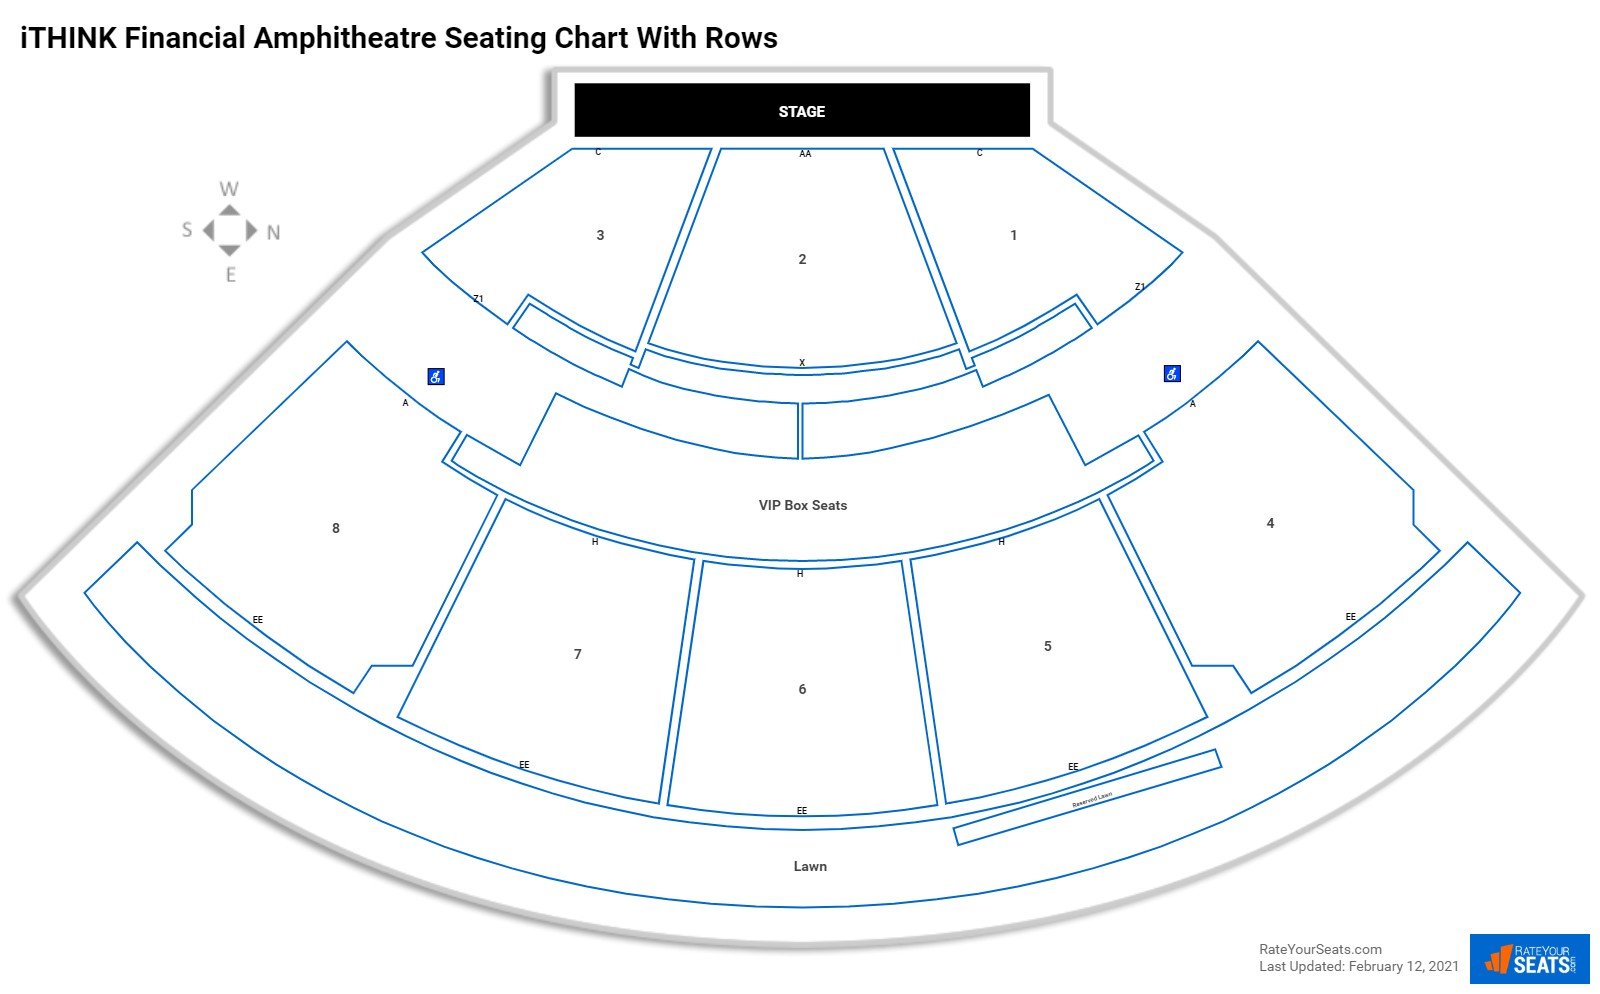 iTHINK Financial Amphitheatre seating chart with row numbers